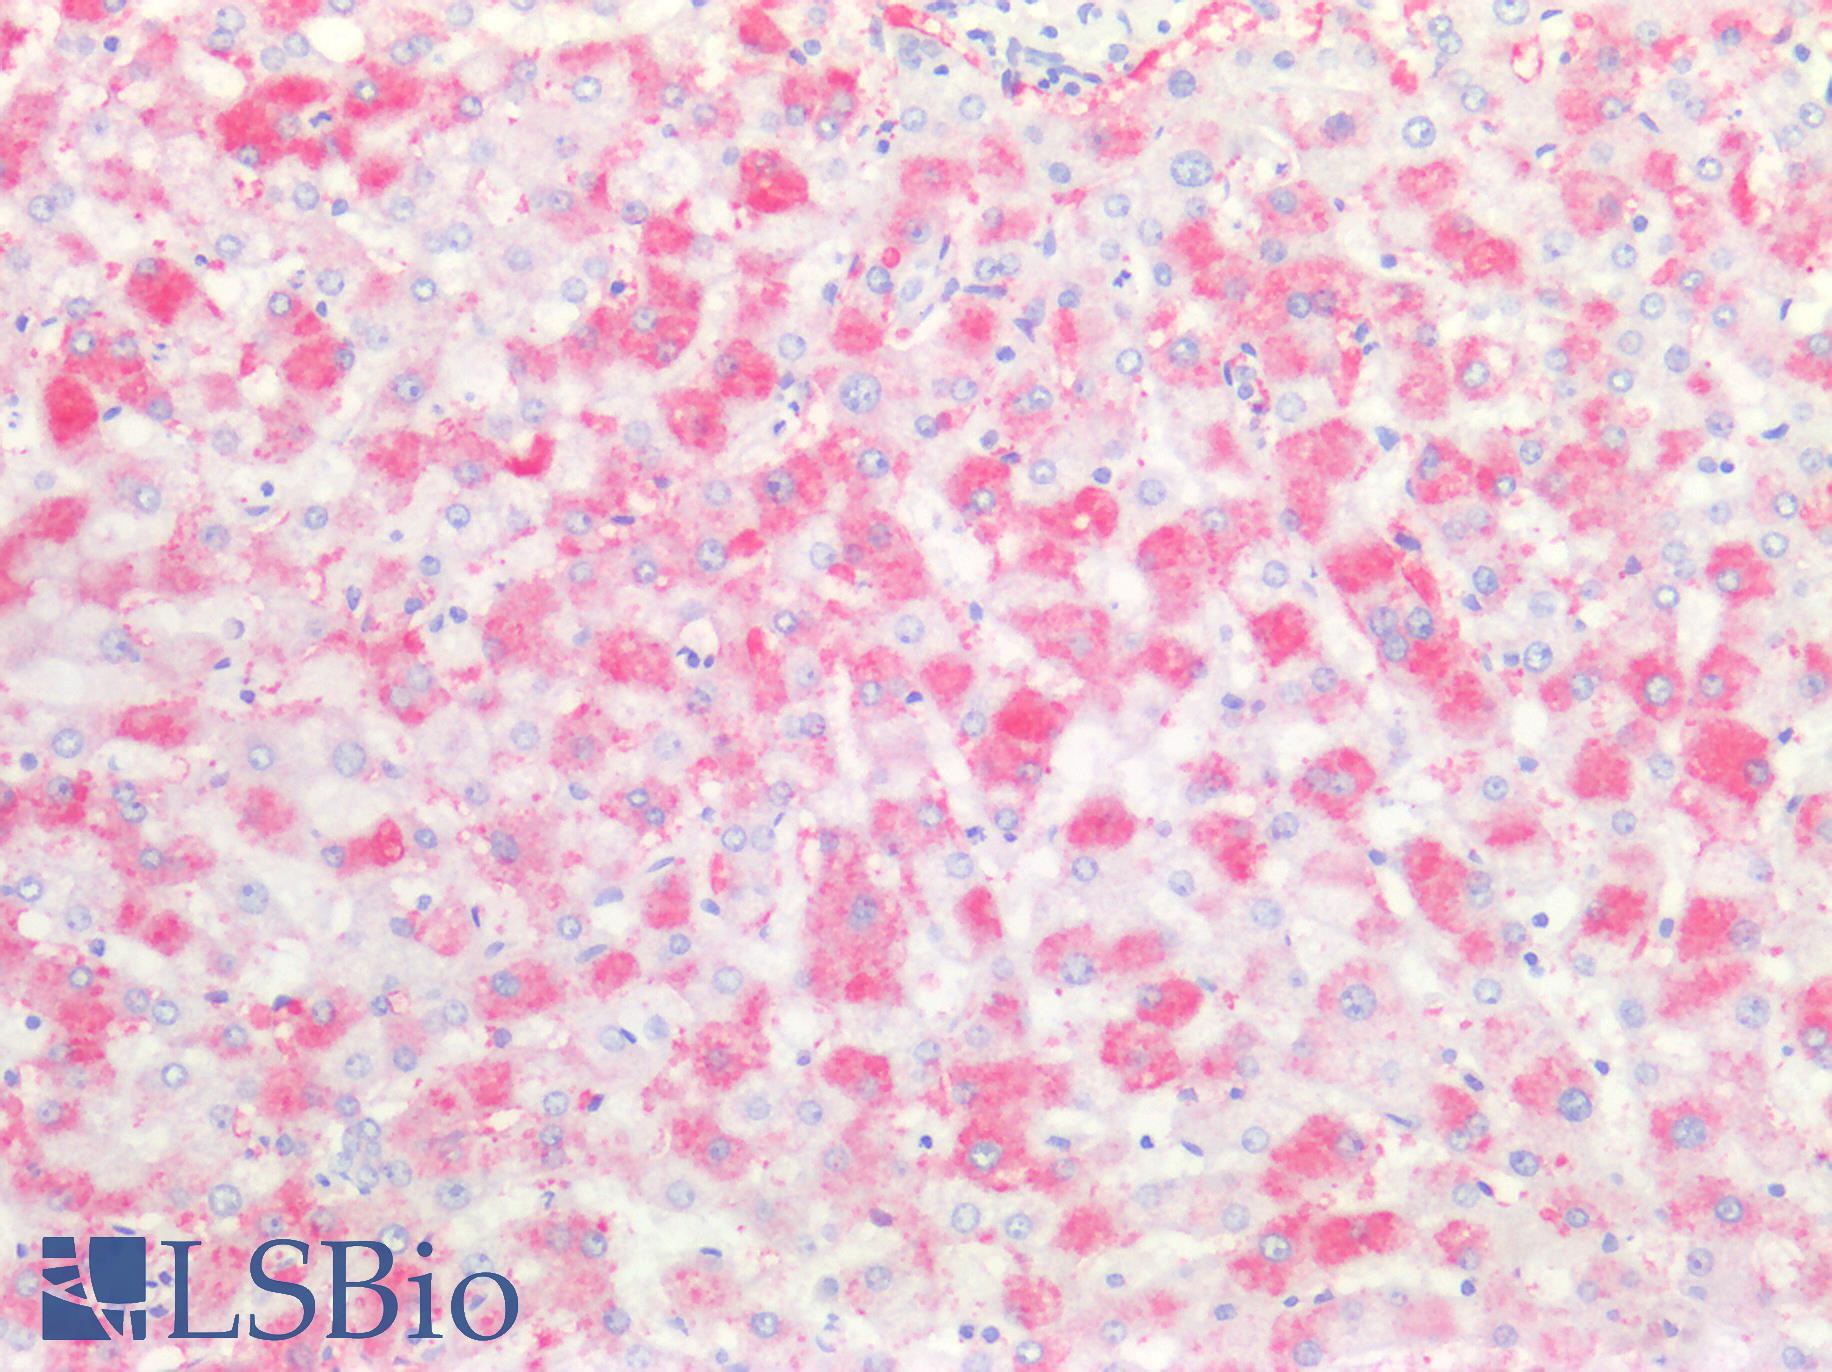 F13A1 / Factor XIIIa Antibody - Human Liver: Formalin-Fixed, Paraffin-Embedded (FFPE)